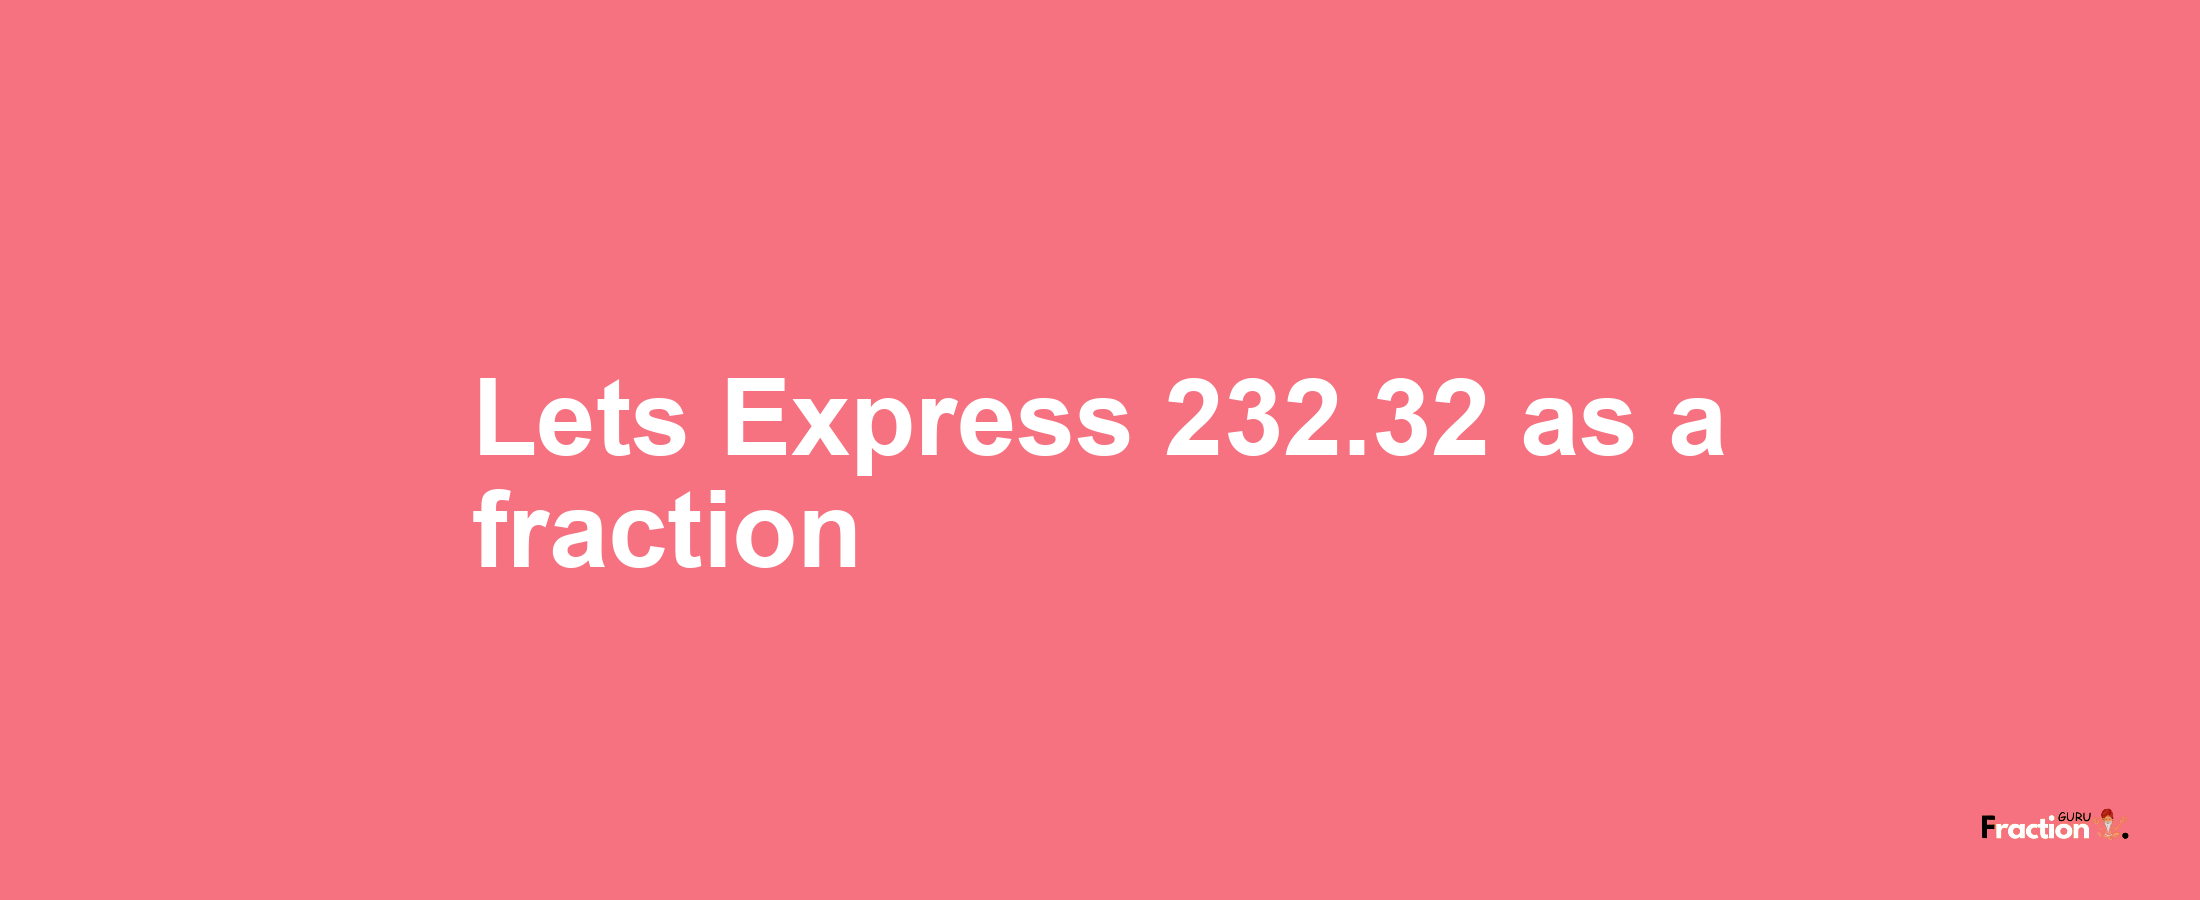 Lets Express 232.32 as afraction